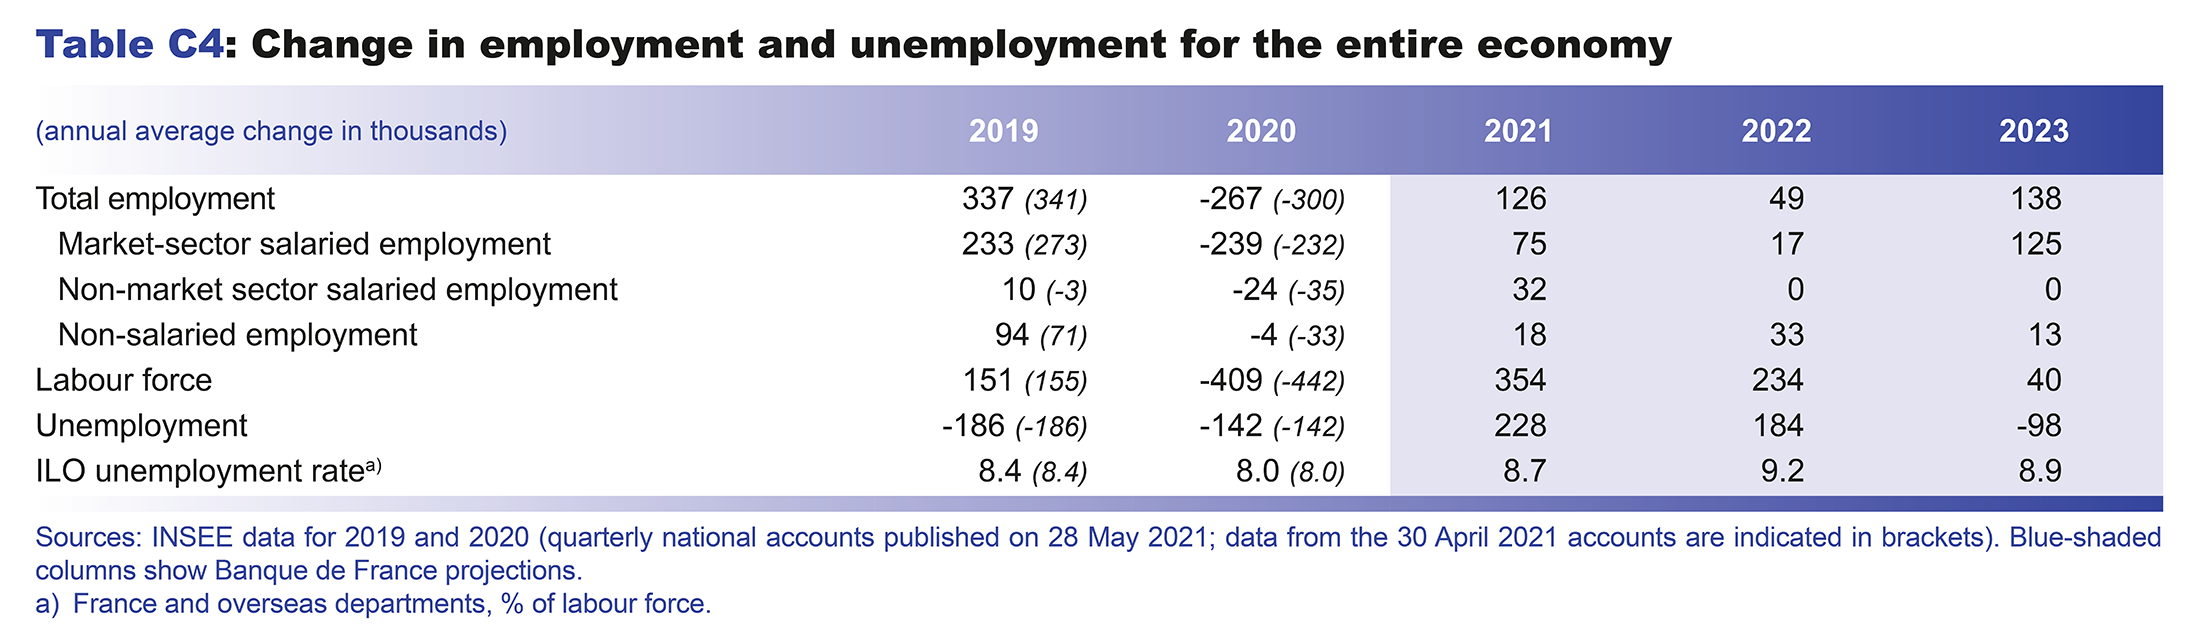 Macroeconomic projections – June 2021 - Change in employment and unemployment for the entire economy